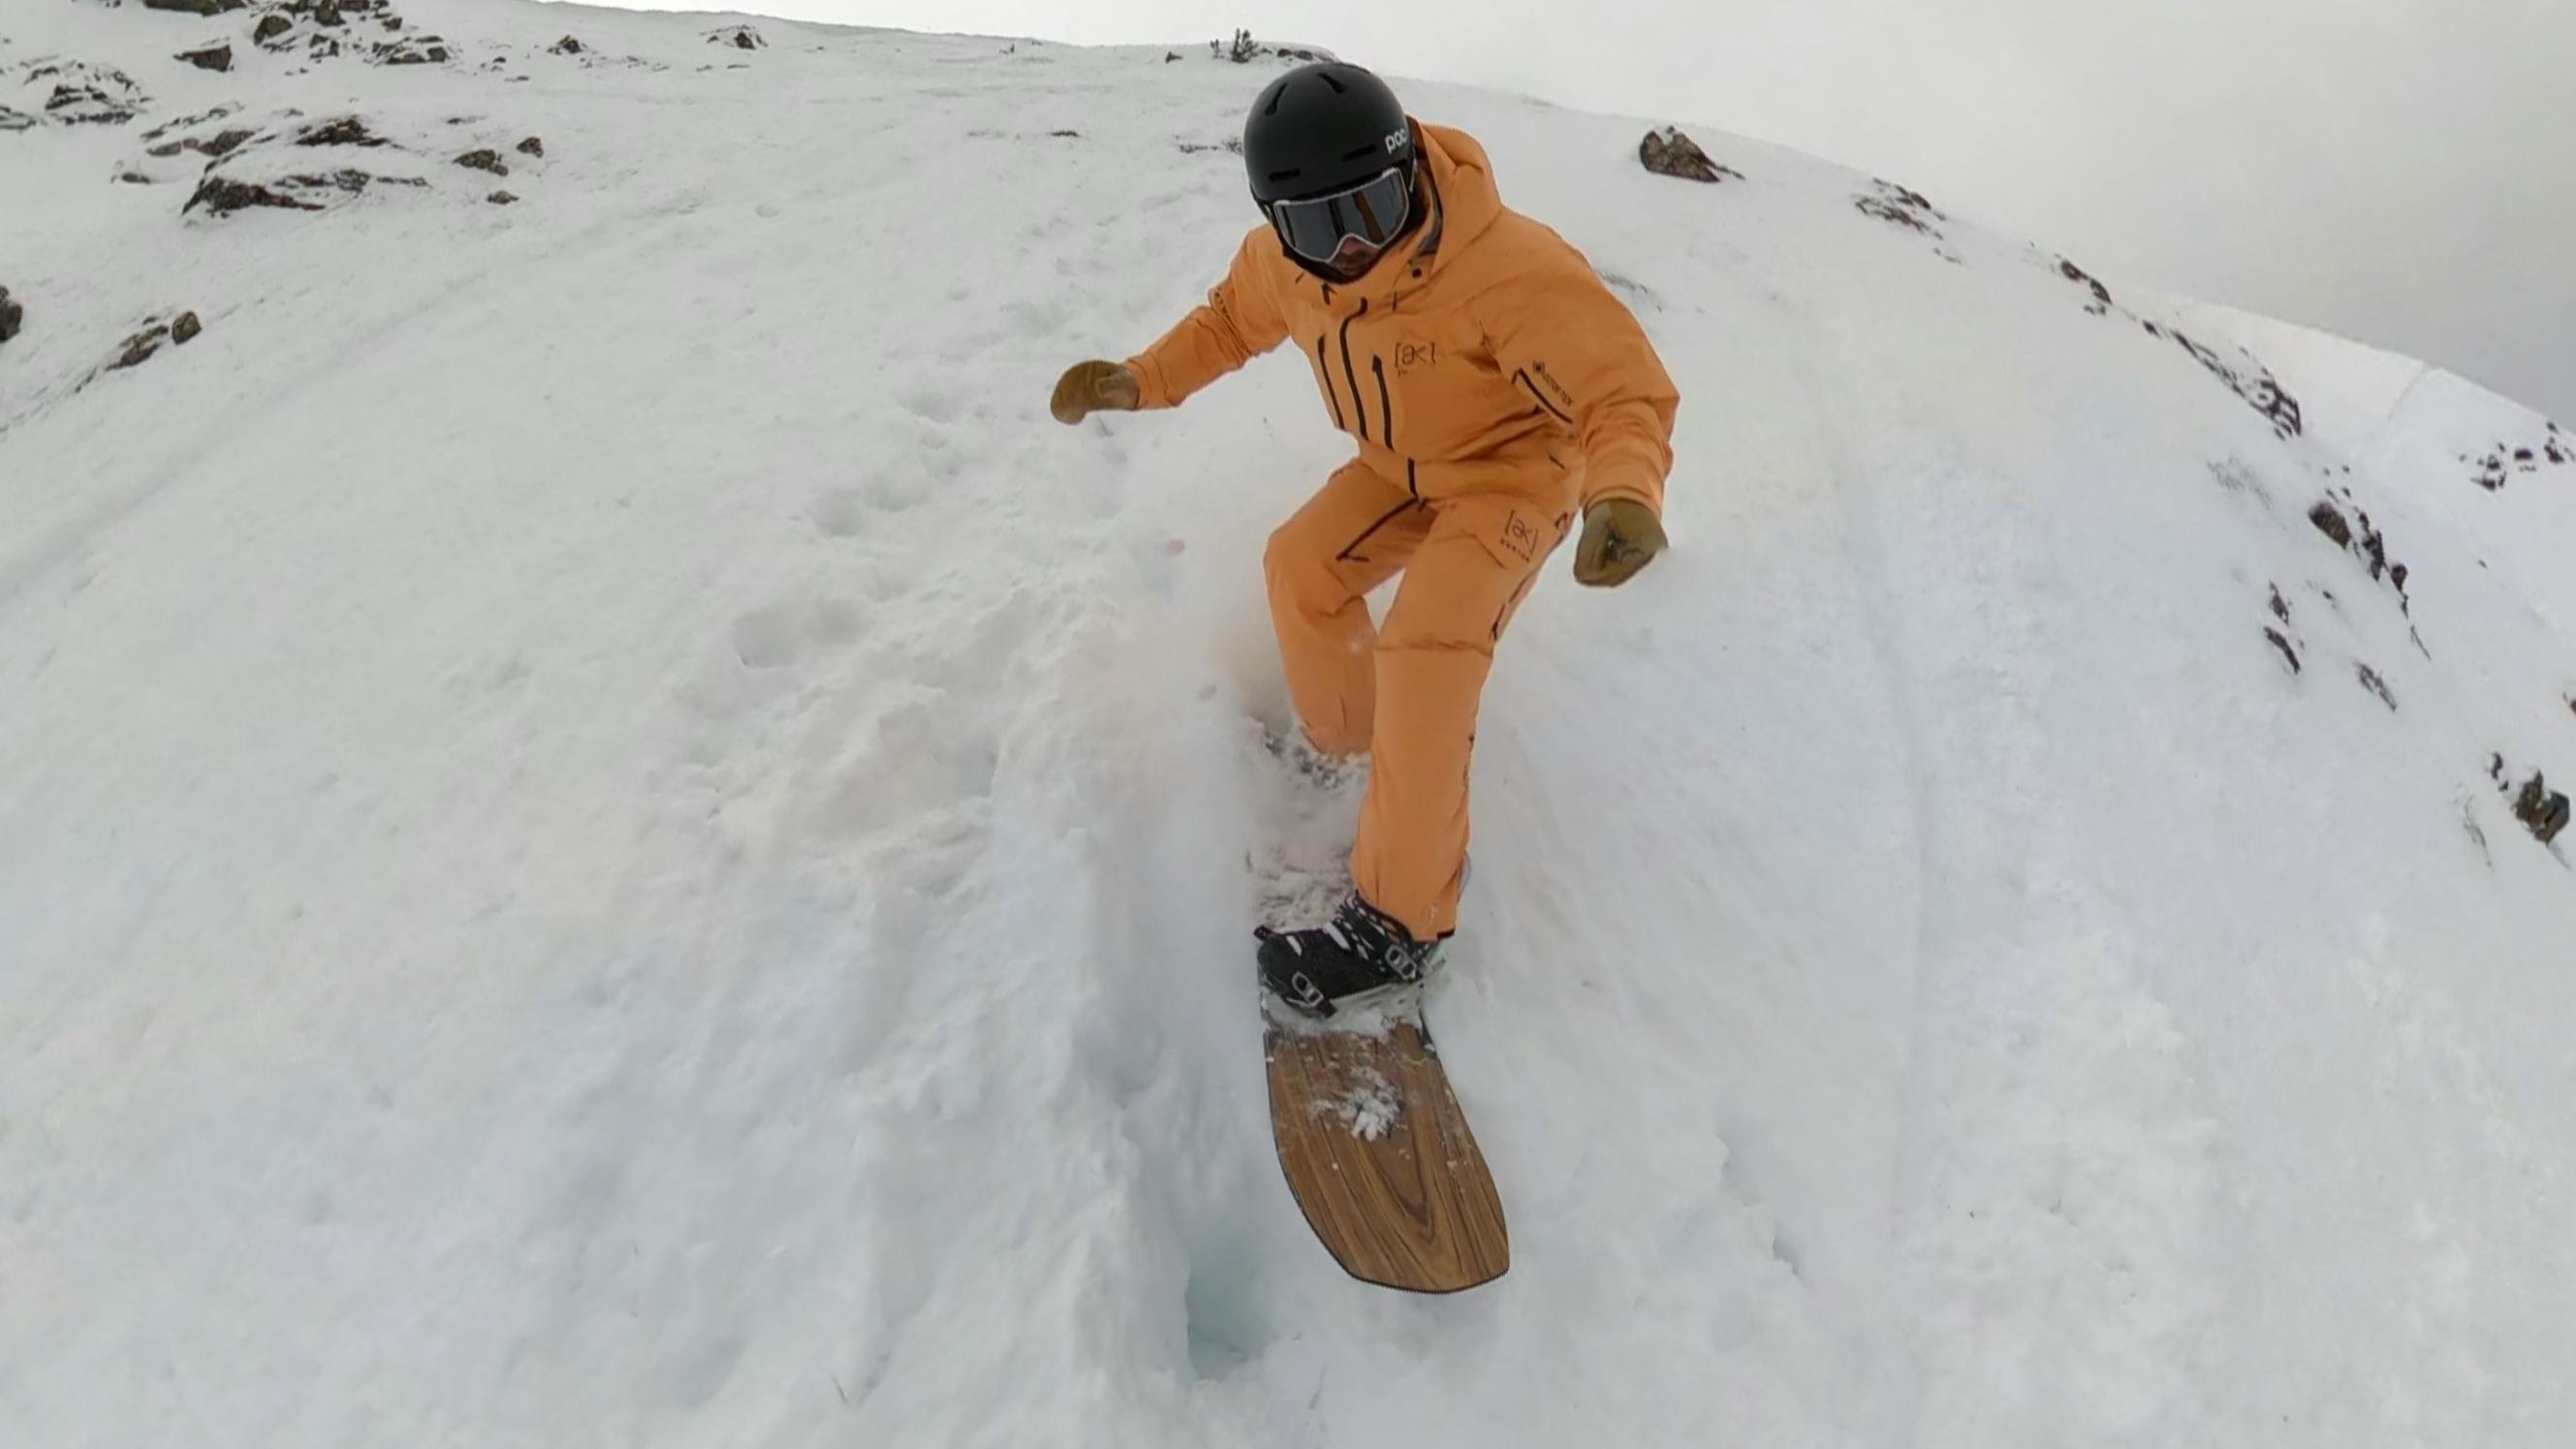 A snowboarder on the Jones Flagship Snowboard.